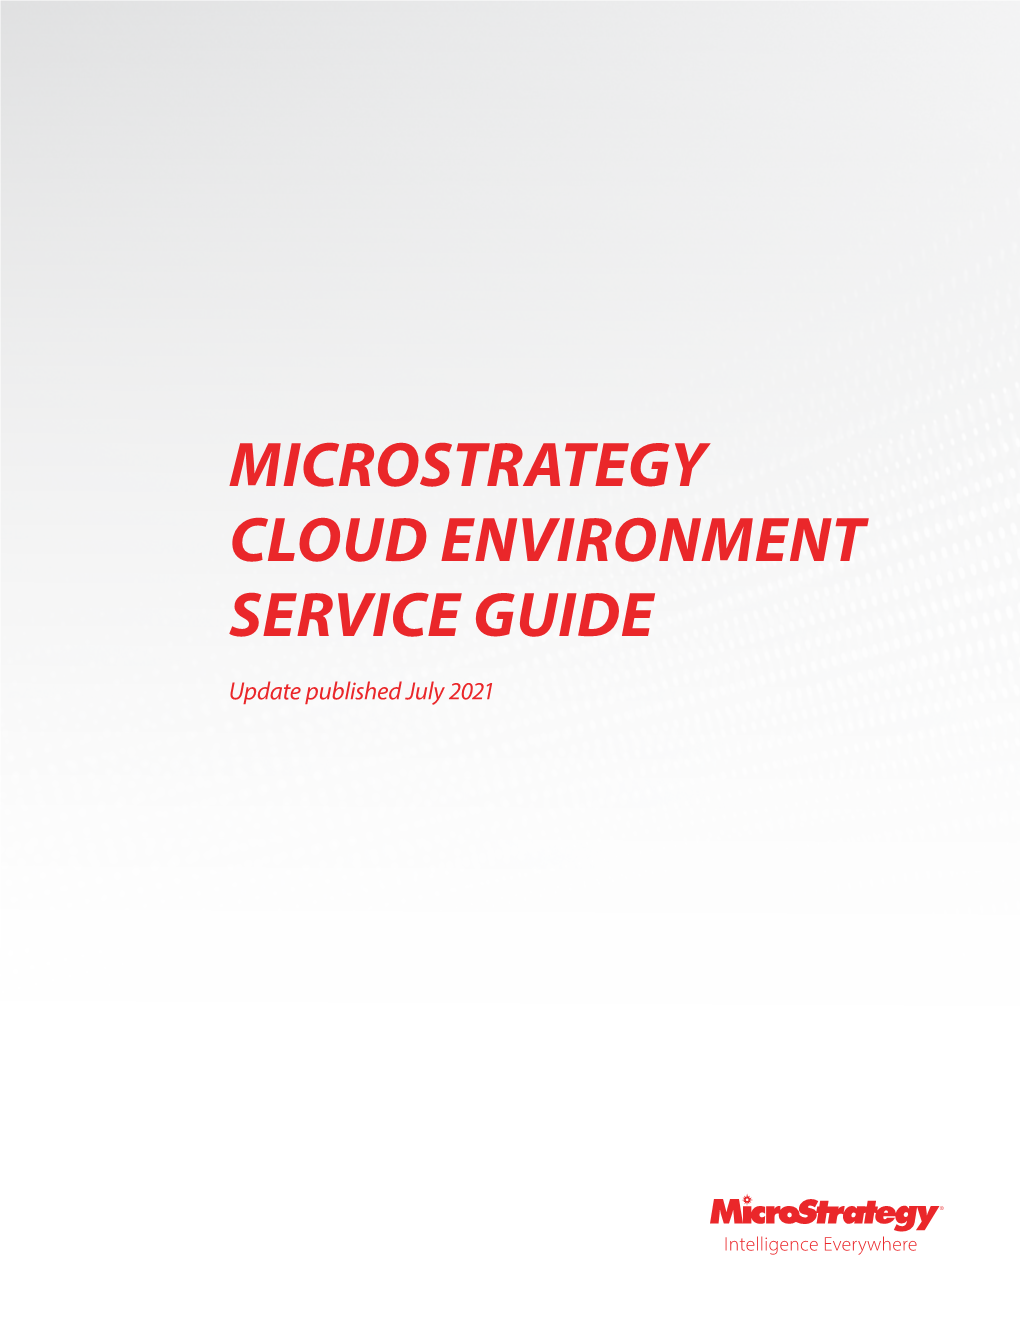 Microstrategy Cloud Environment Service Guide